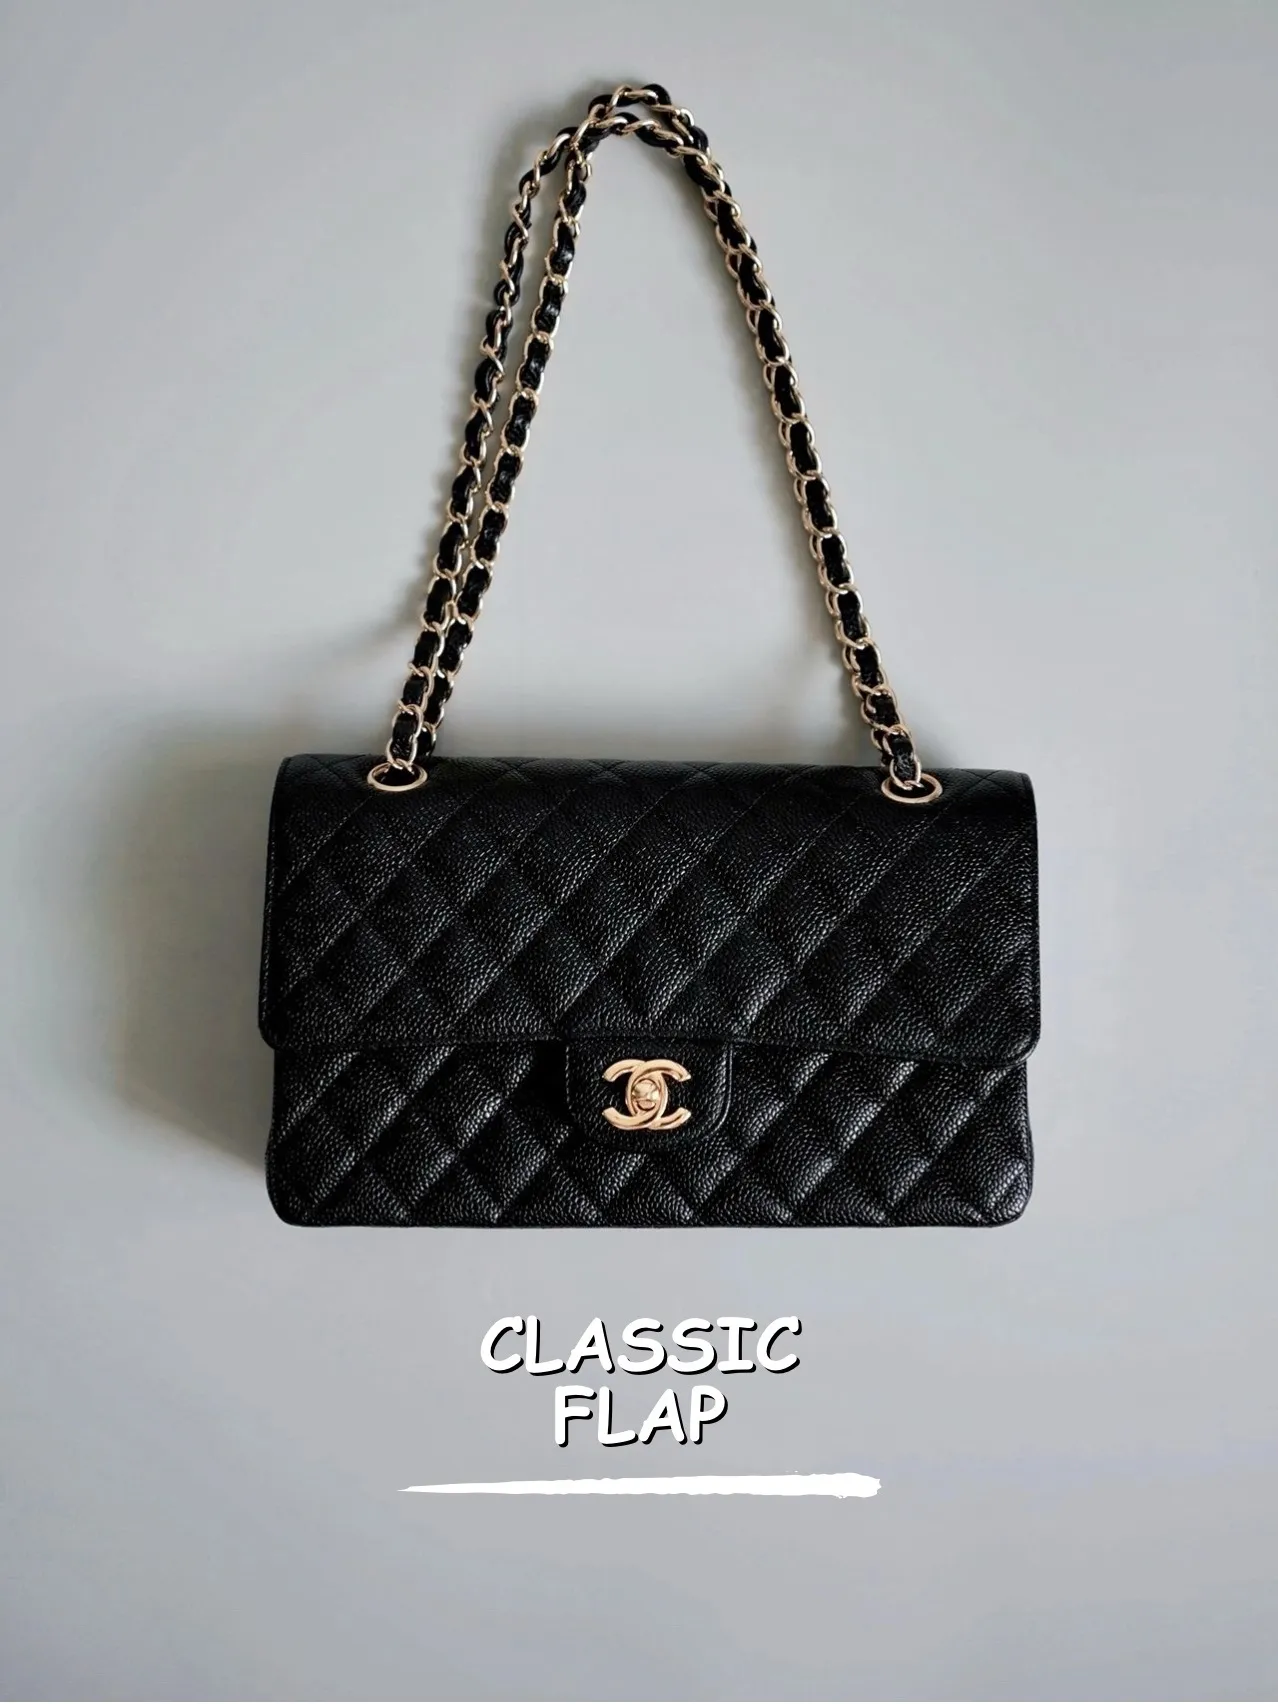 The Black Chanel Trio 👜, Gallery posted by Emily Wilson